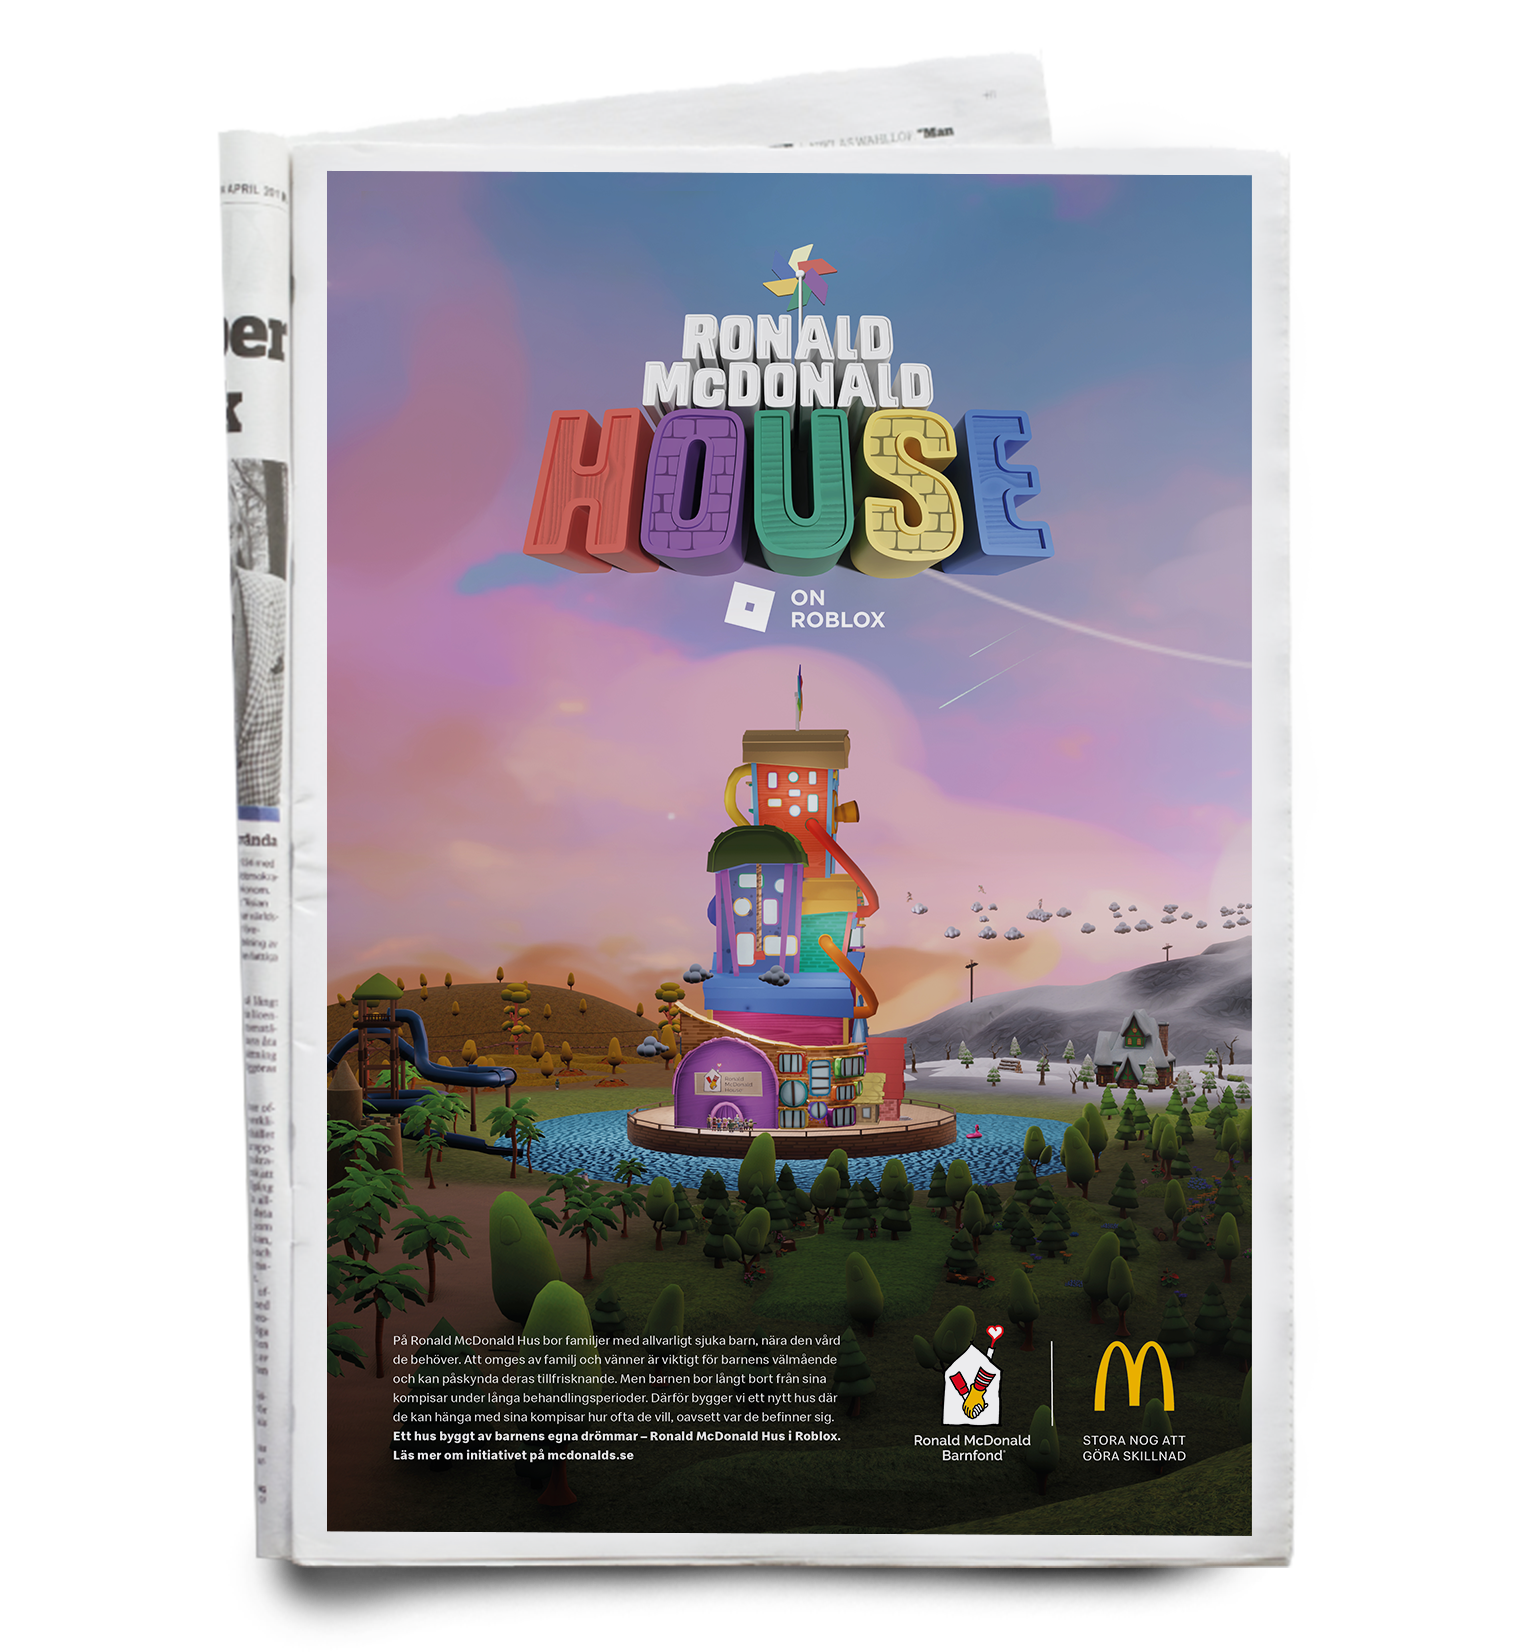 Ronald McDonald House launches digital house on Roblox to connect